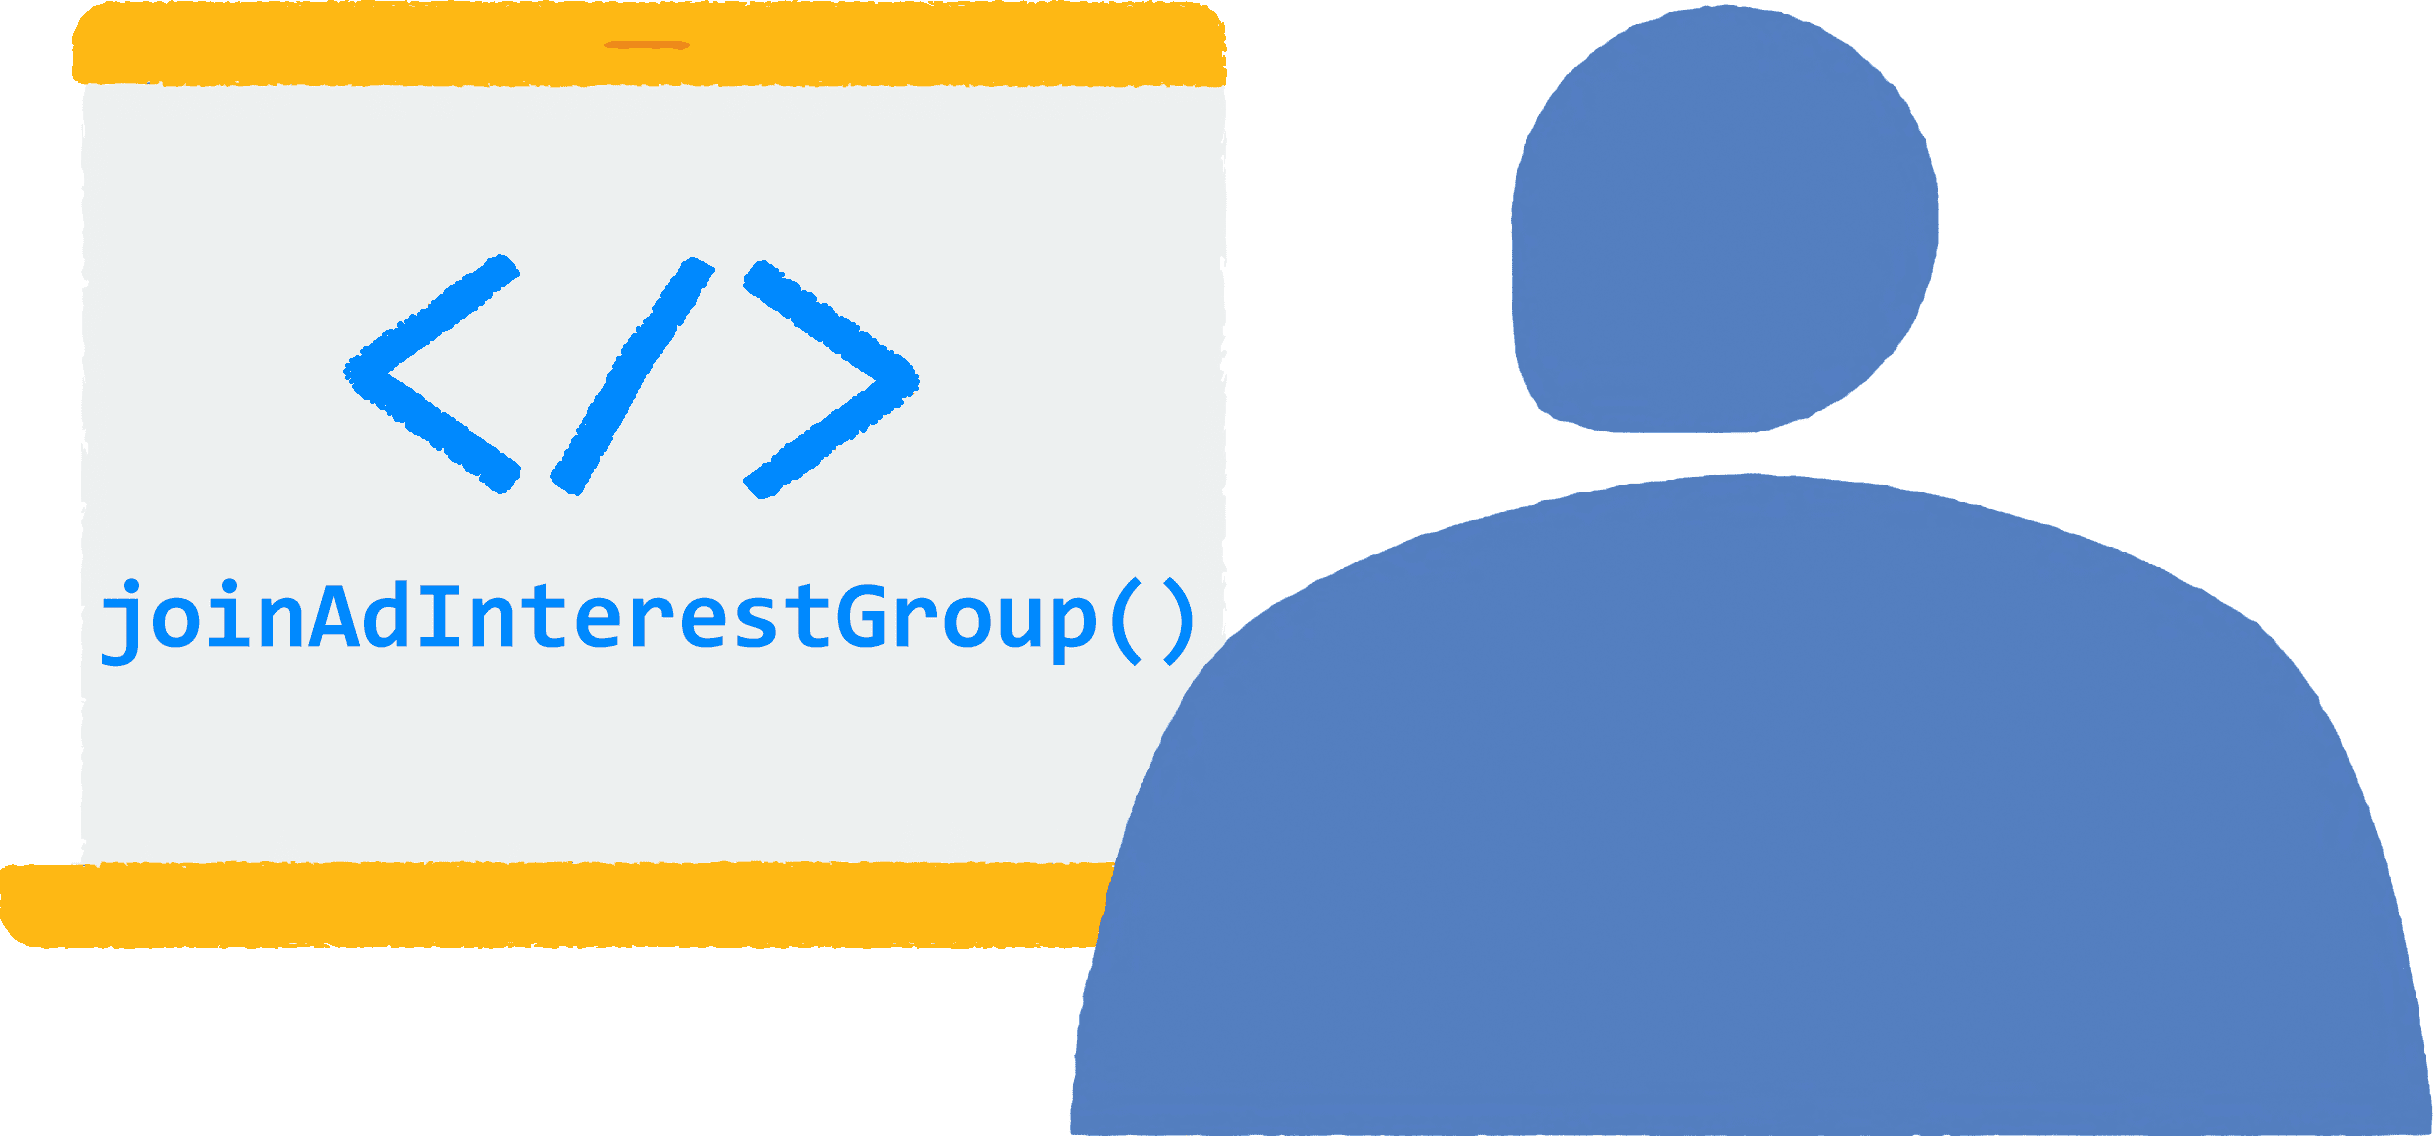 A user opens a browser on their laptop and visits a site. JavaScript
  code for joining ad interest groups is running in the browser.